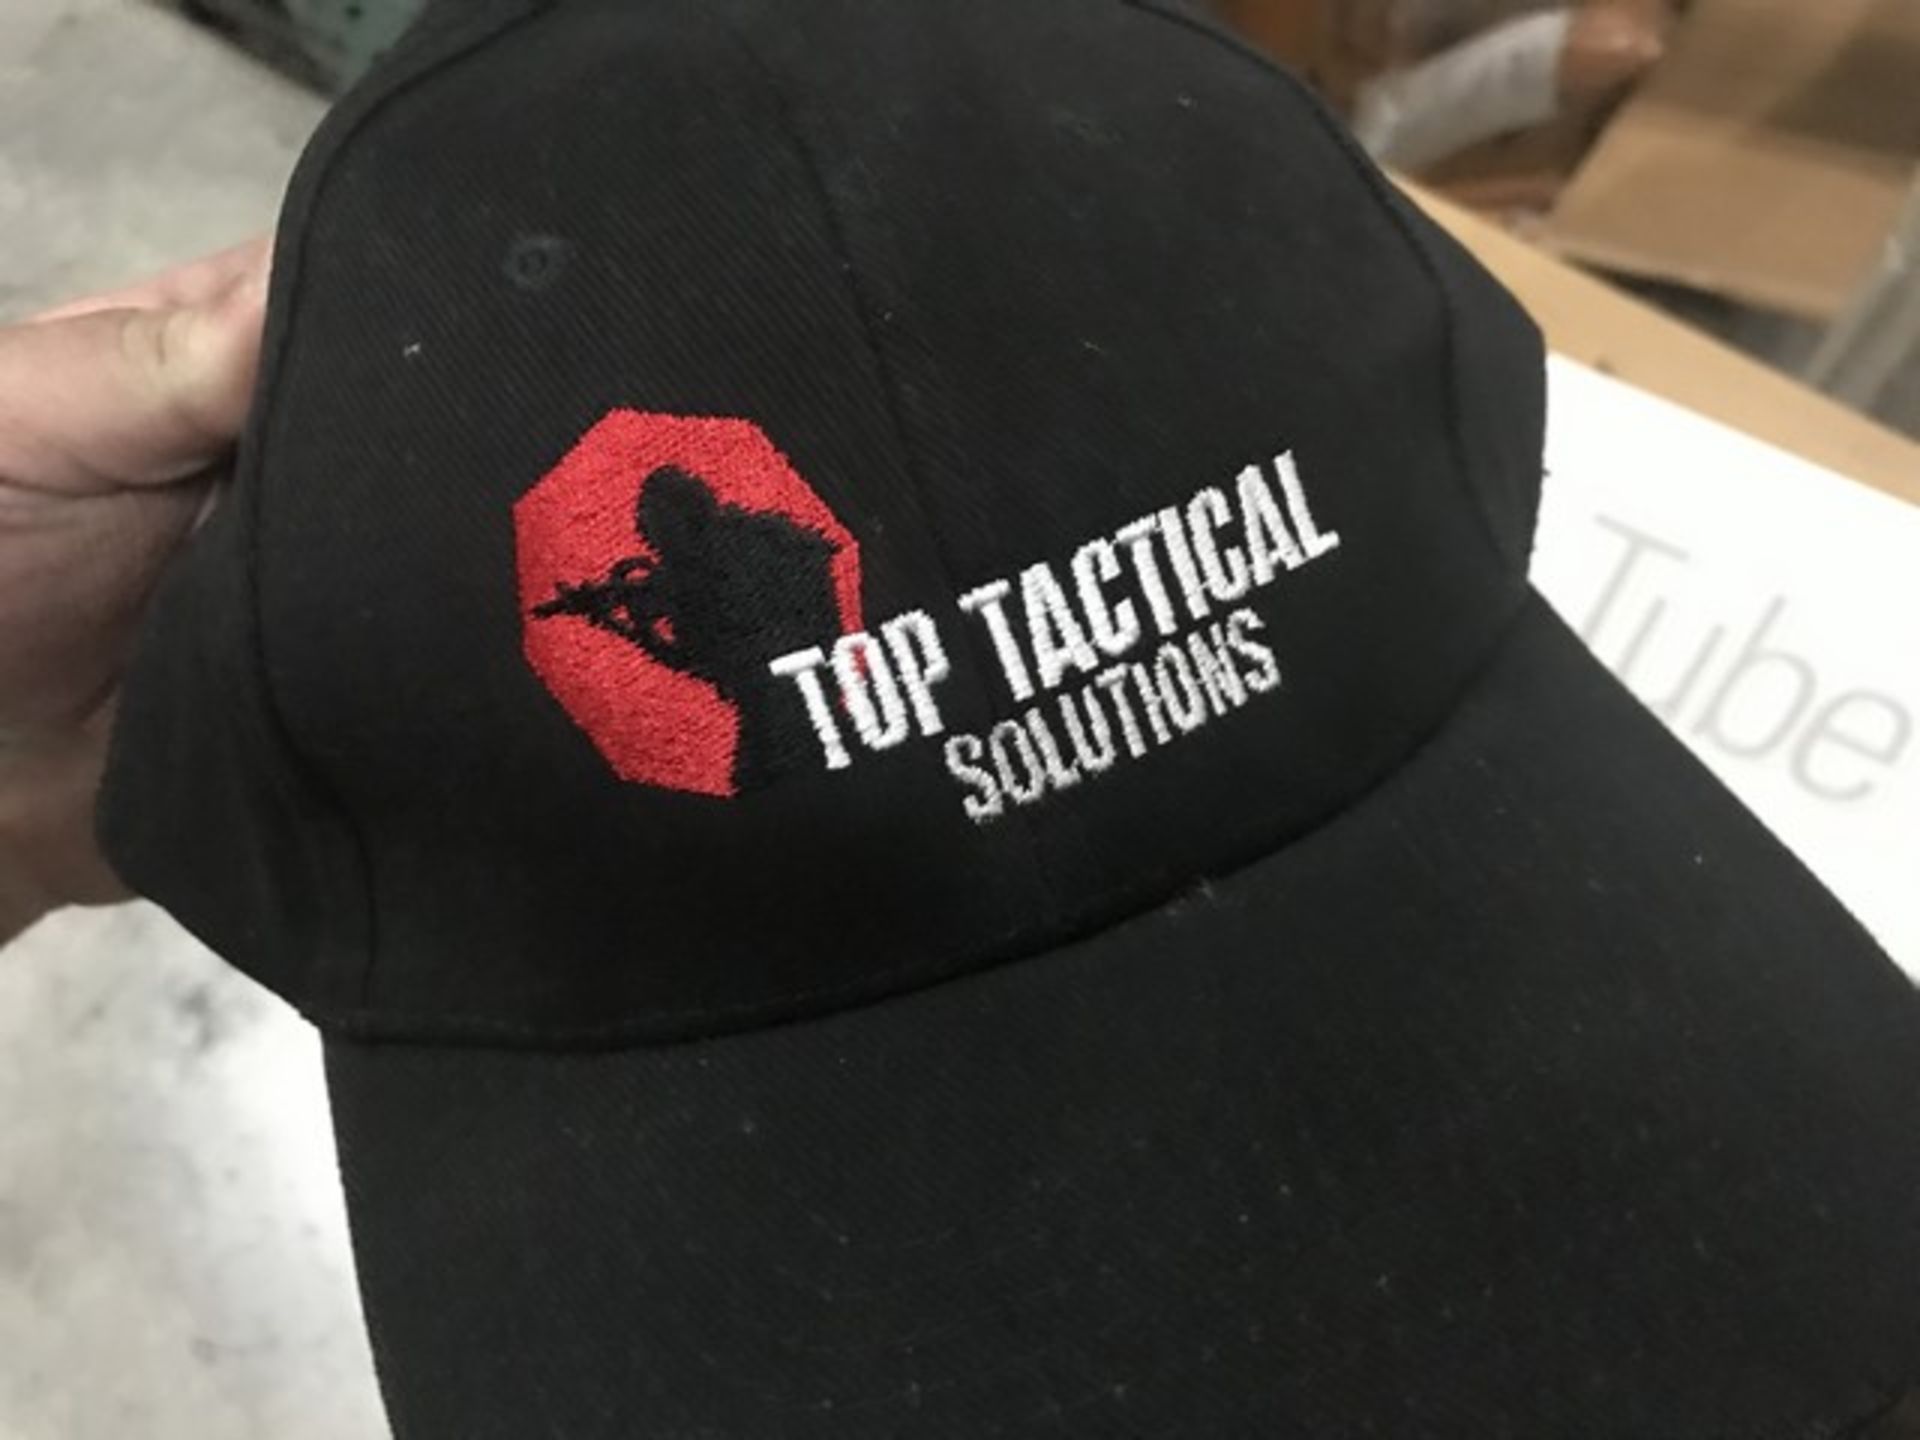 LOT TOP TACTICAL SOLUTIONS HATS, 3 SIGNS, T-SHIRTS - 'TOPTACTICALSOLUTIONS.COM' - Image 2 of 2